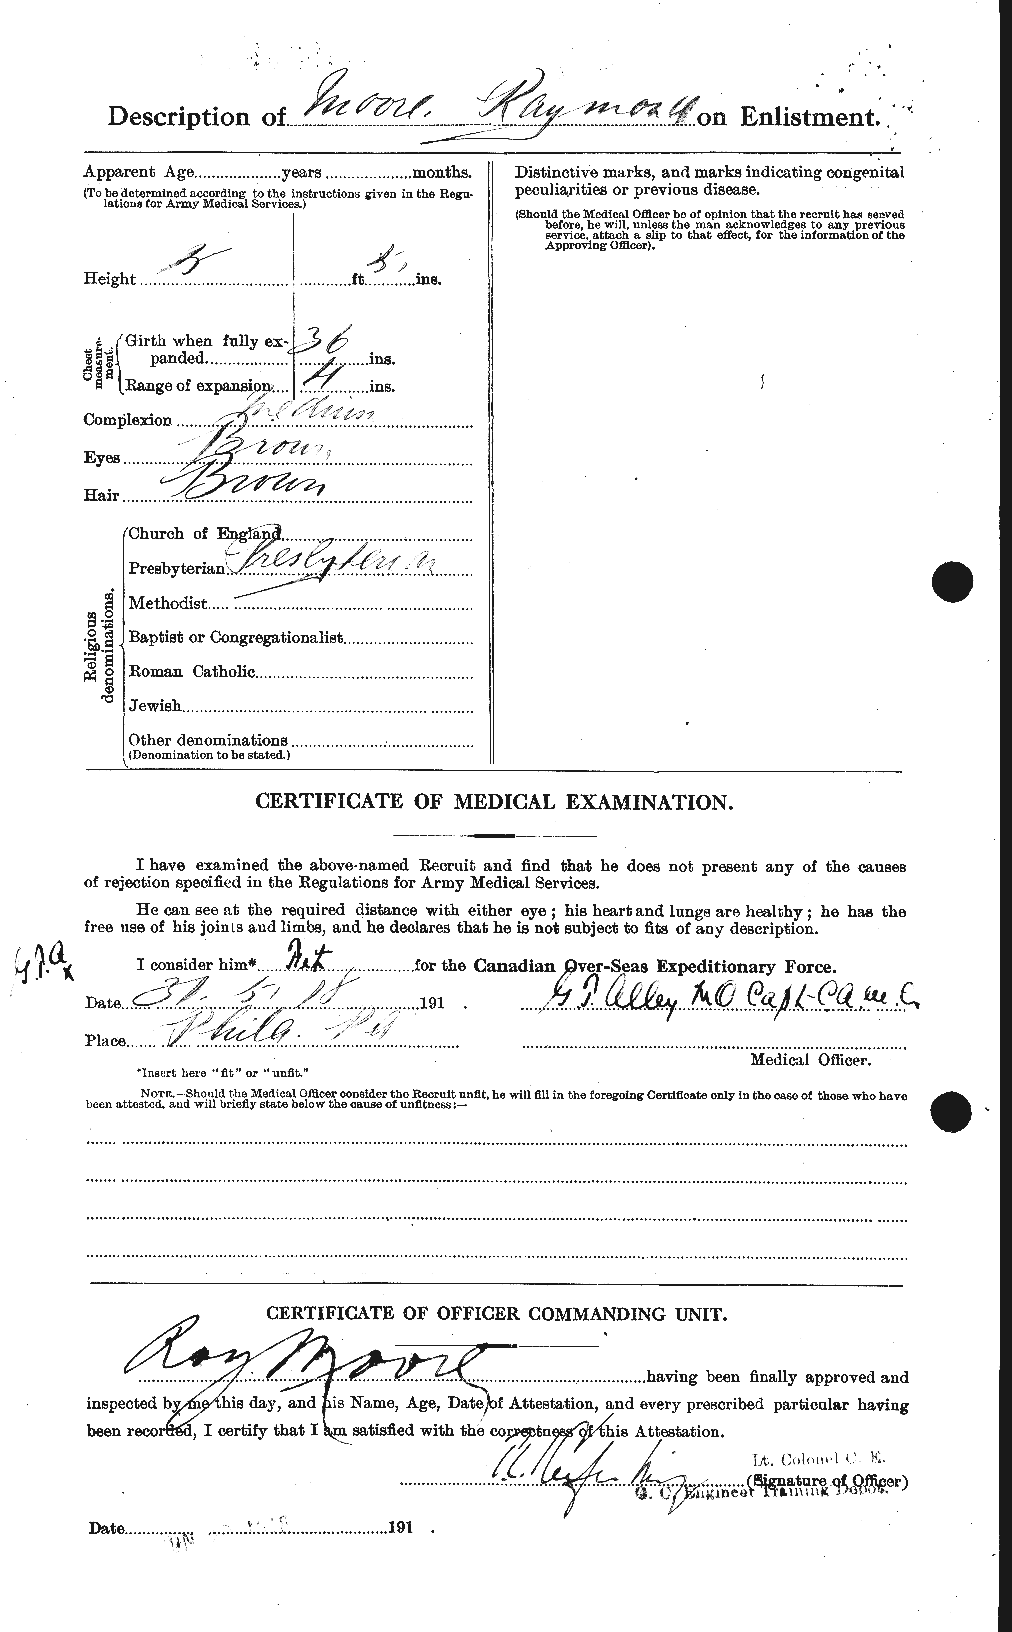 Personnel Records of the First World War - CEF 503518b